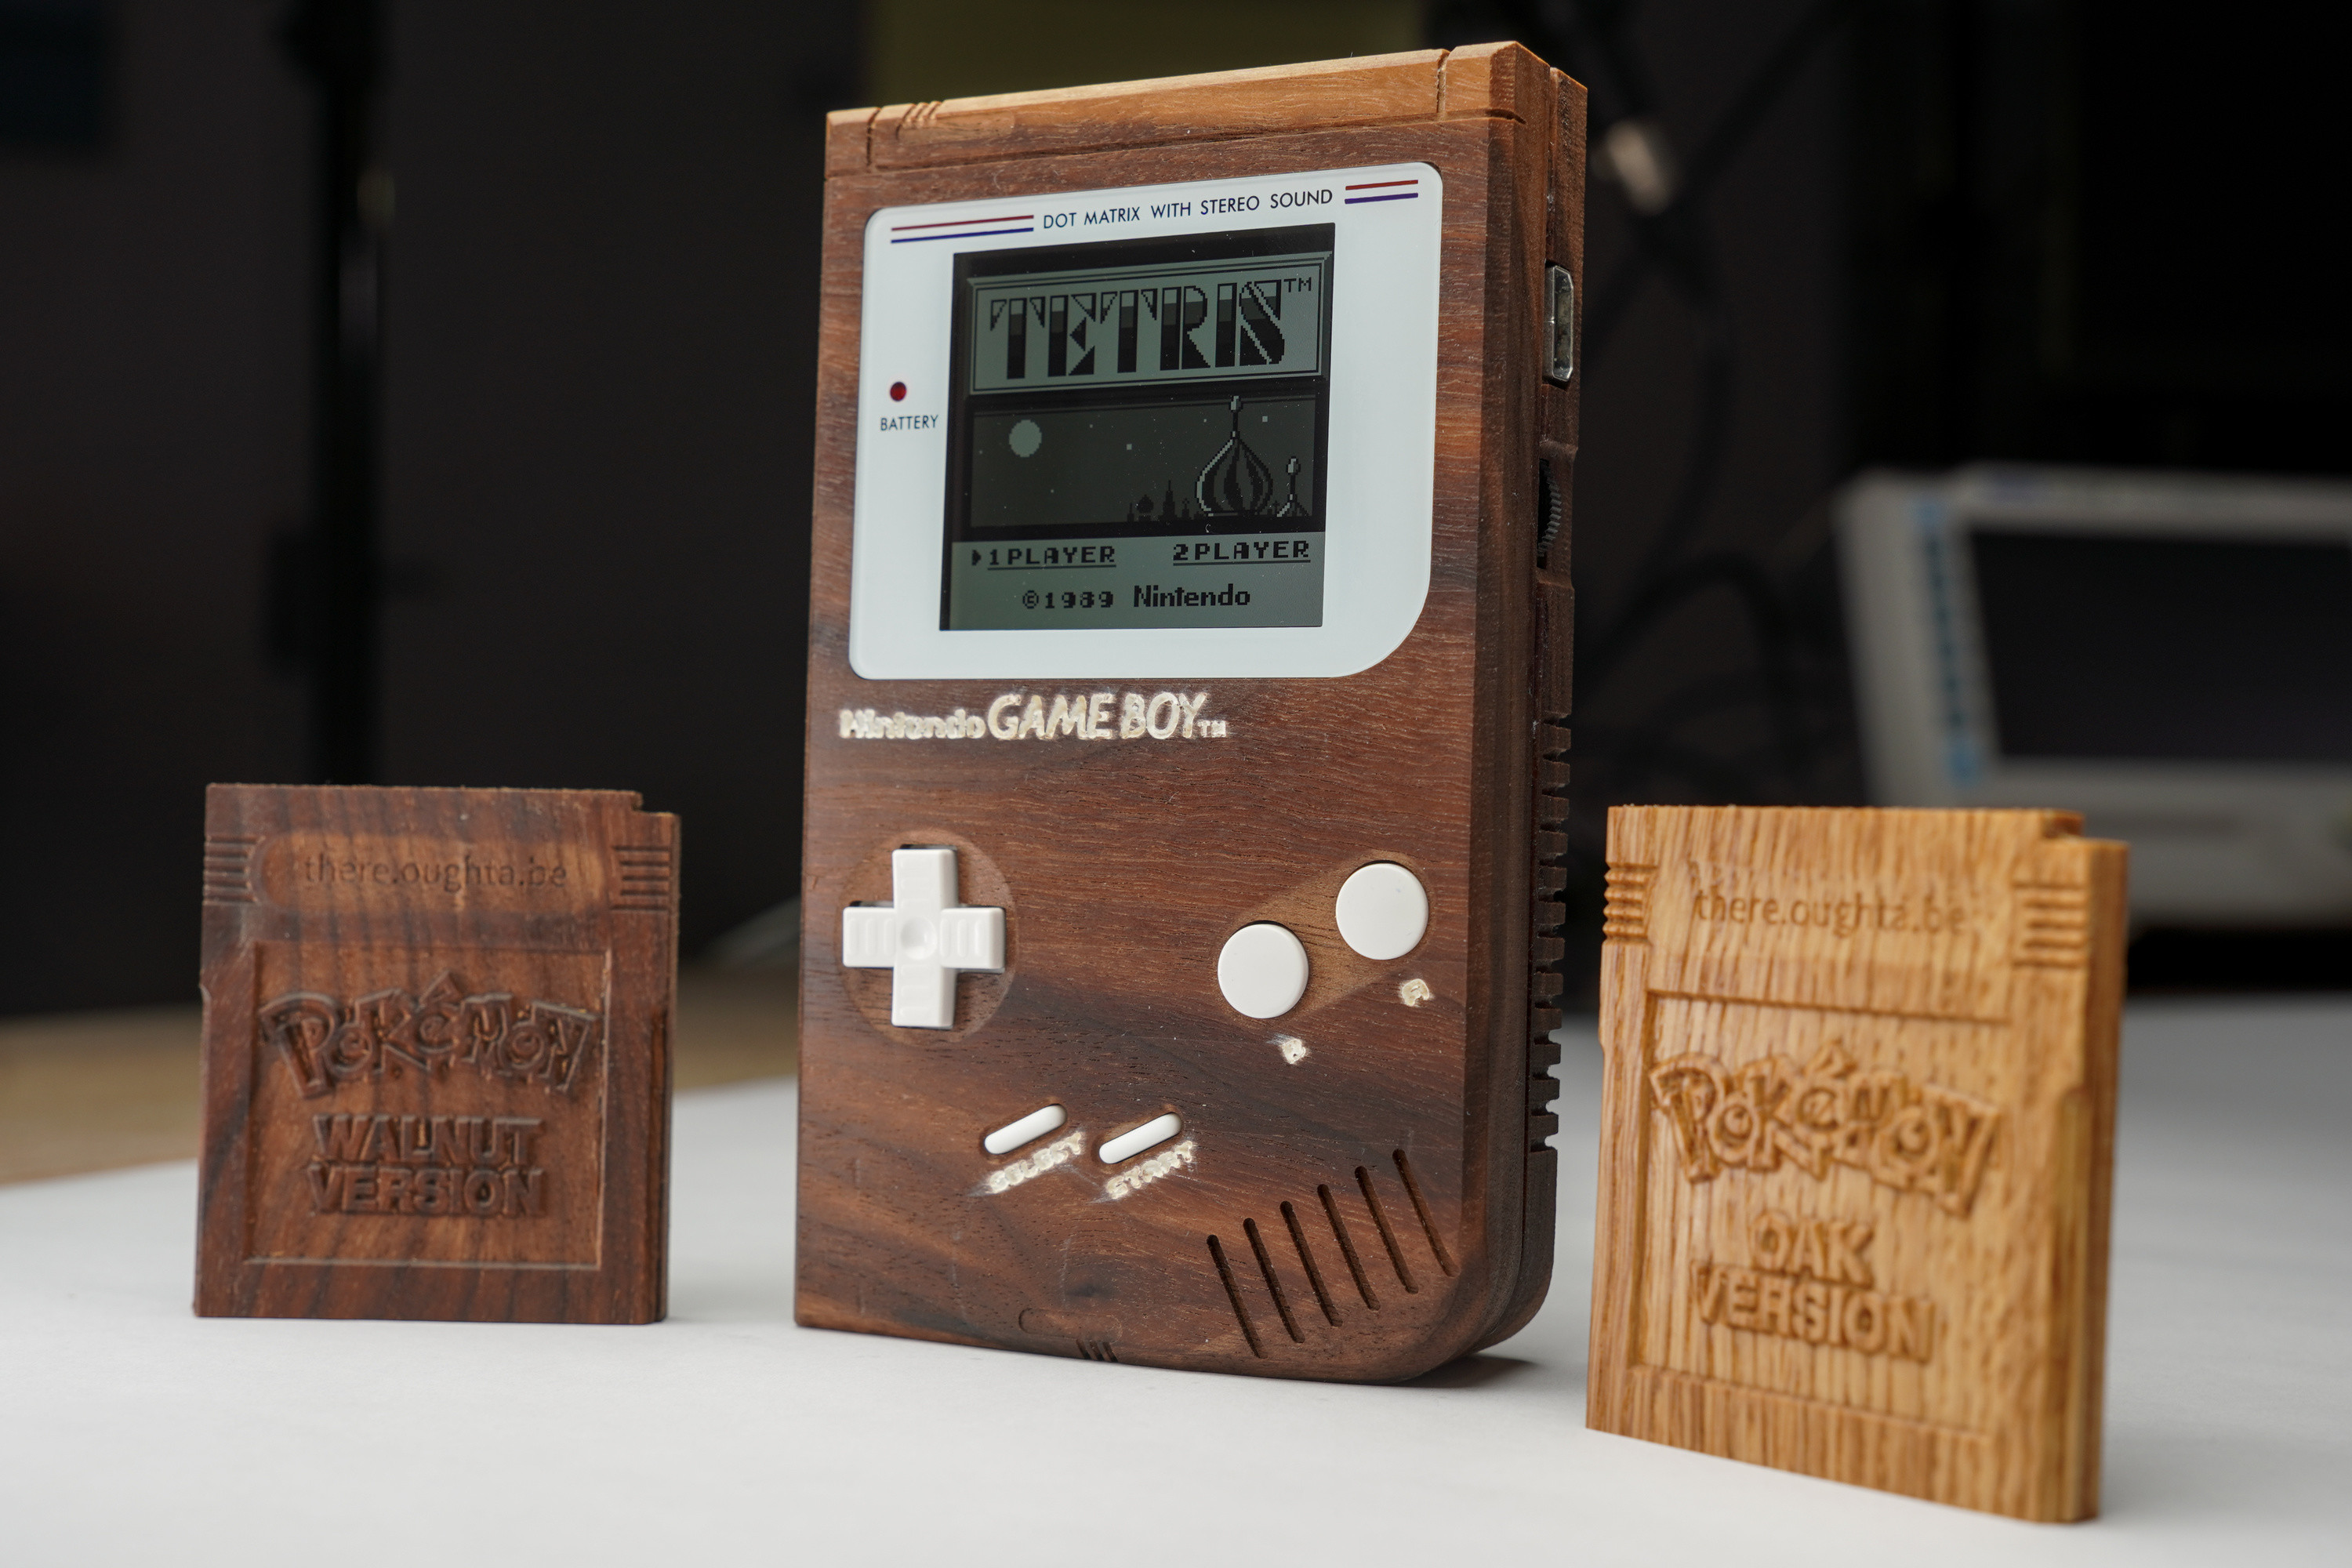 Photo of the dark brown wooden Game Boy with white buttons and white screen bezel ist standing on a white surface with a dark blurred backdrop. It shows the title screen of Tetris. To the left and right are wooden Game Boy cartridges. The left one has the same color as the Game Boy and has a carved label reading "Pokemon Walnut version". The other one is made of brighter wood and reads "Pokemon Oak version".